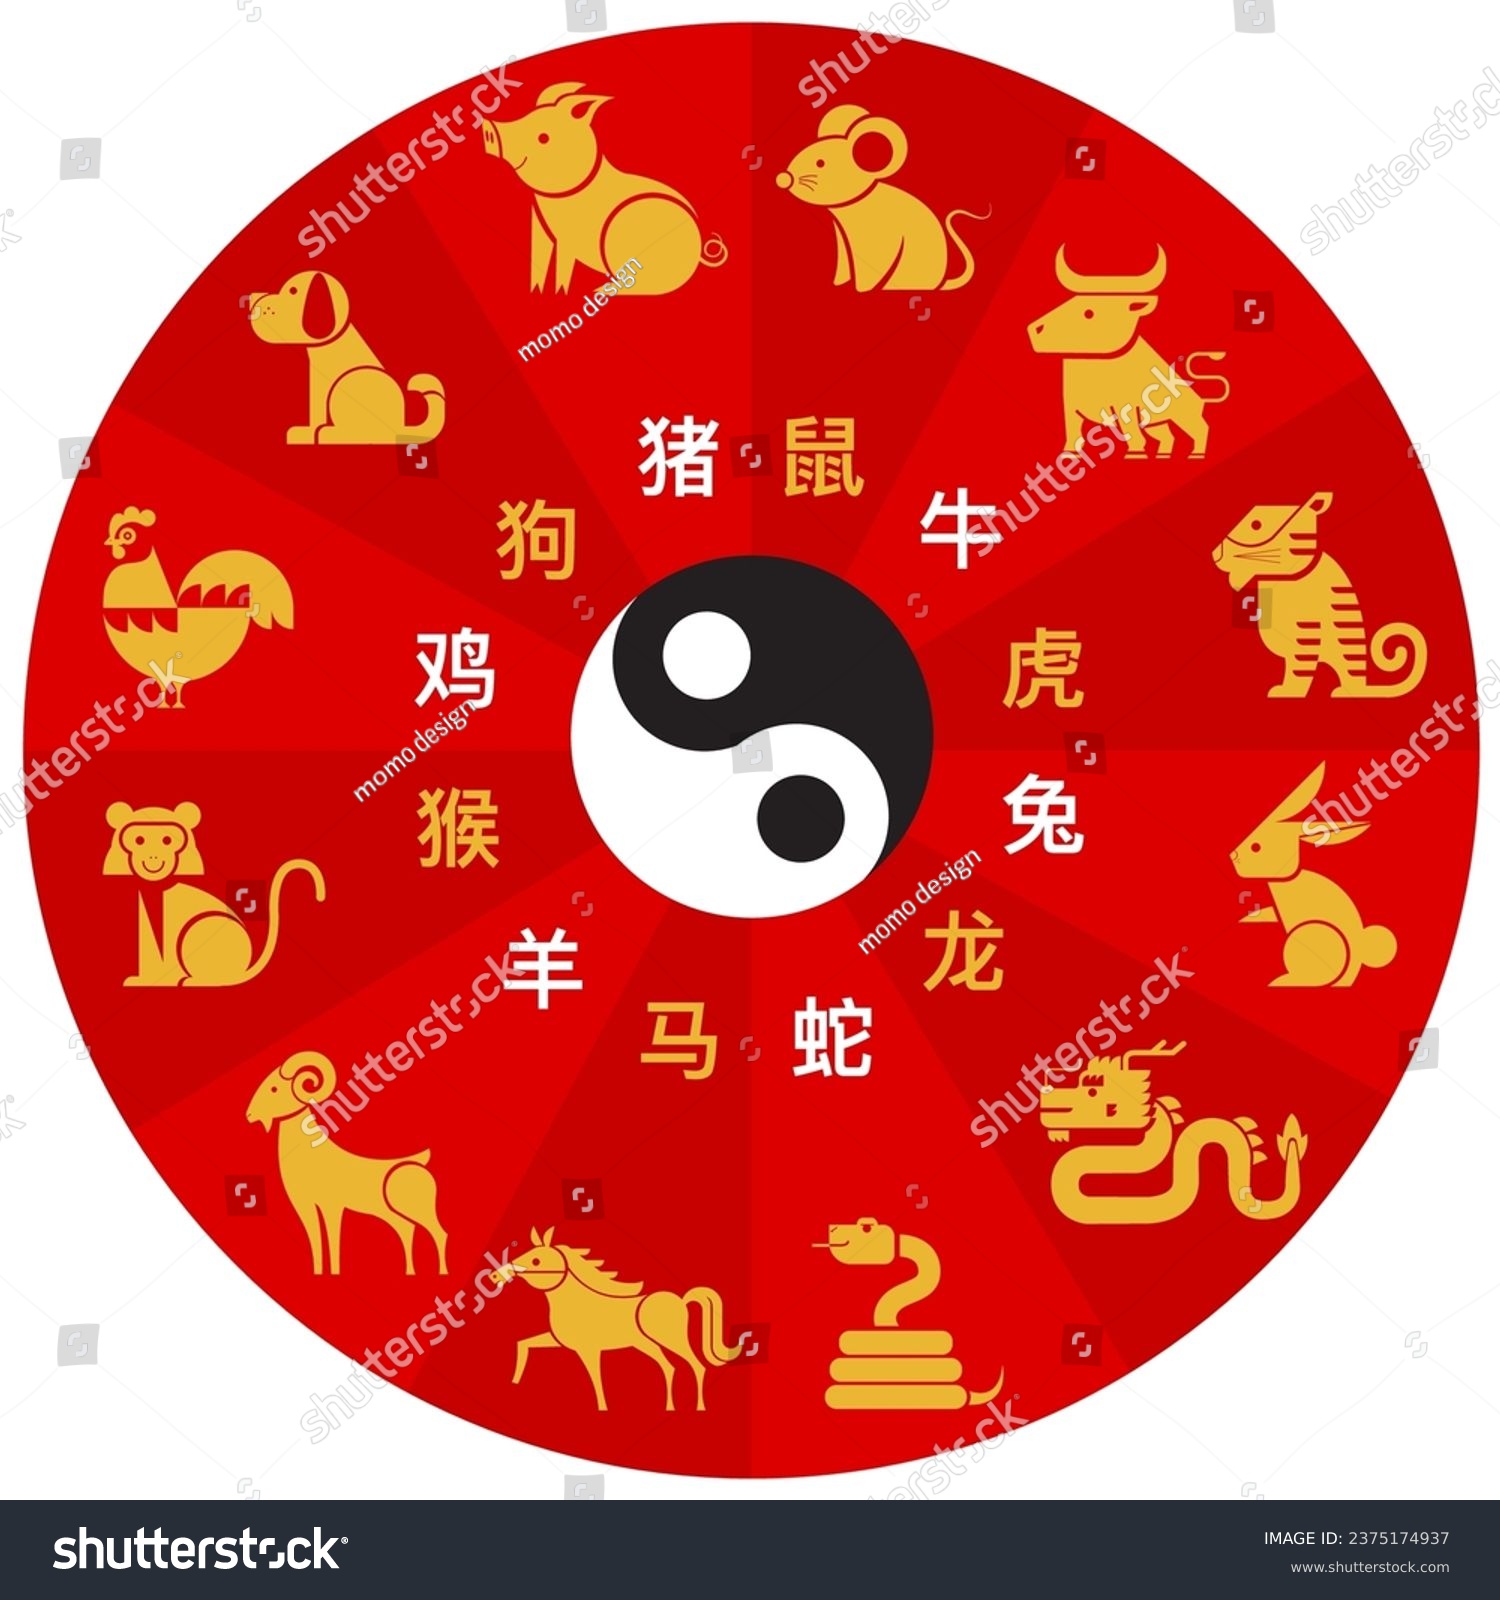 SVG of Cute Chinese horoscope zodiac set. Collection of animals sign, symbols of year. China New Year mascots ( translate: rabbit , dragon, snake, tiger, ox, rat, pig, dog, rooster, monkey, goat, horse ) svg